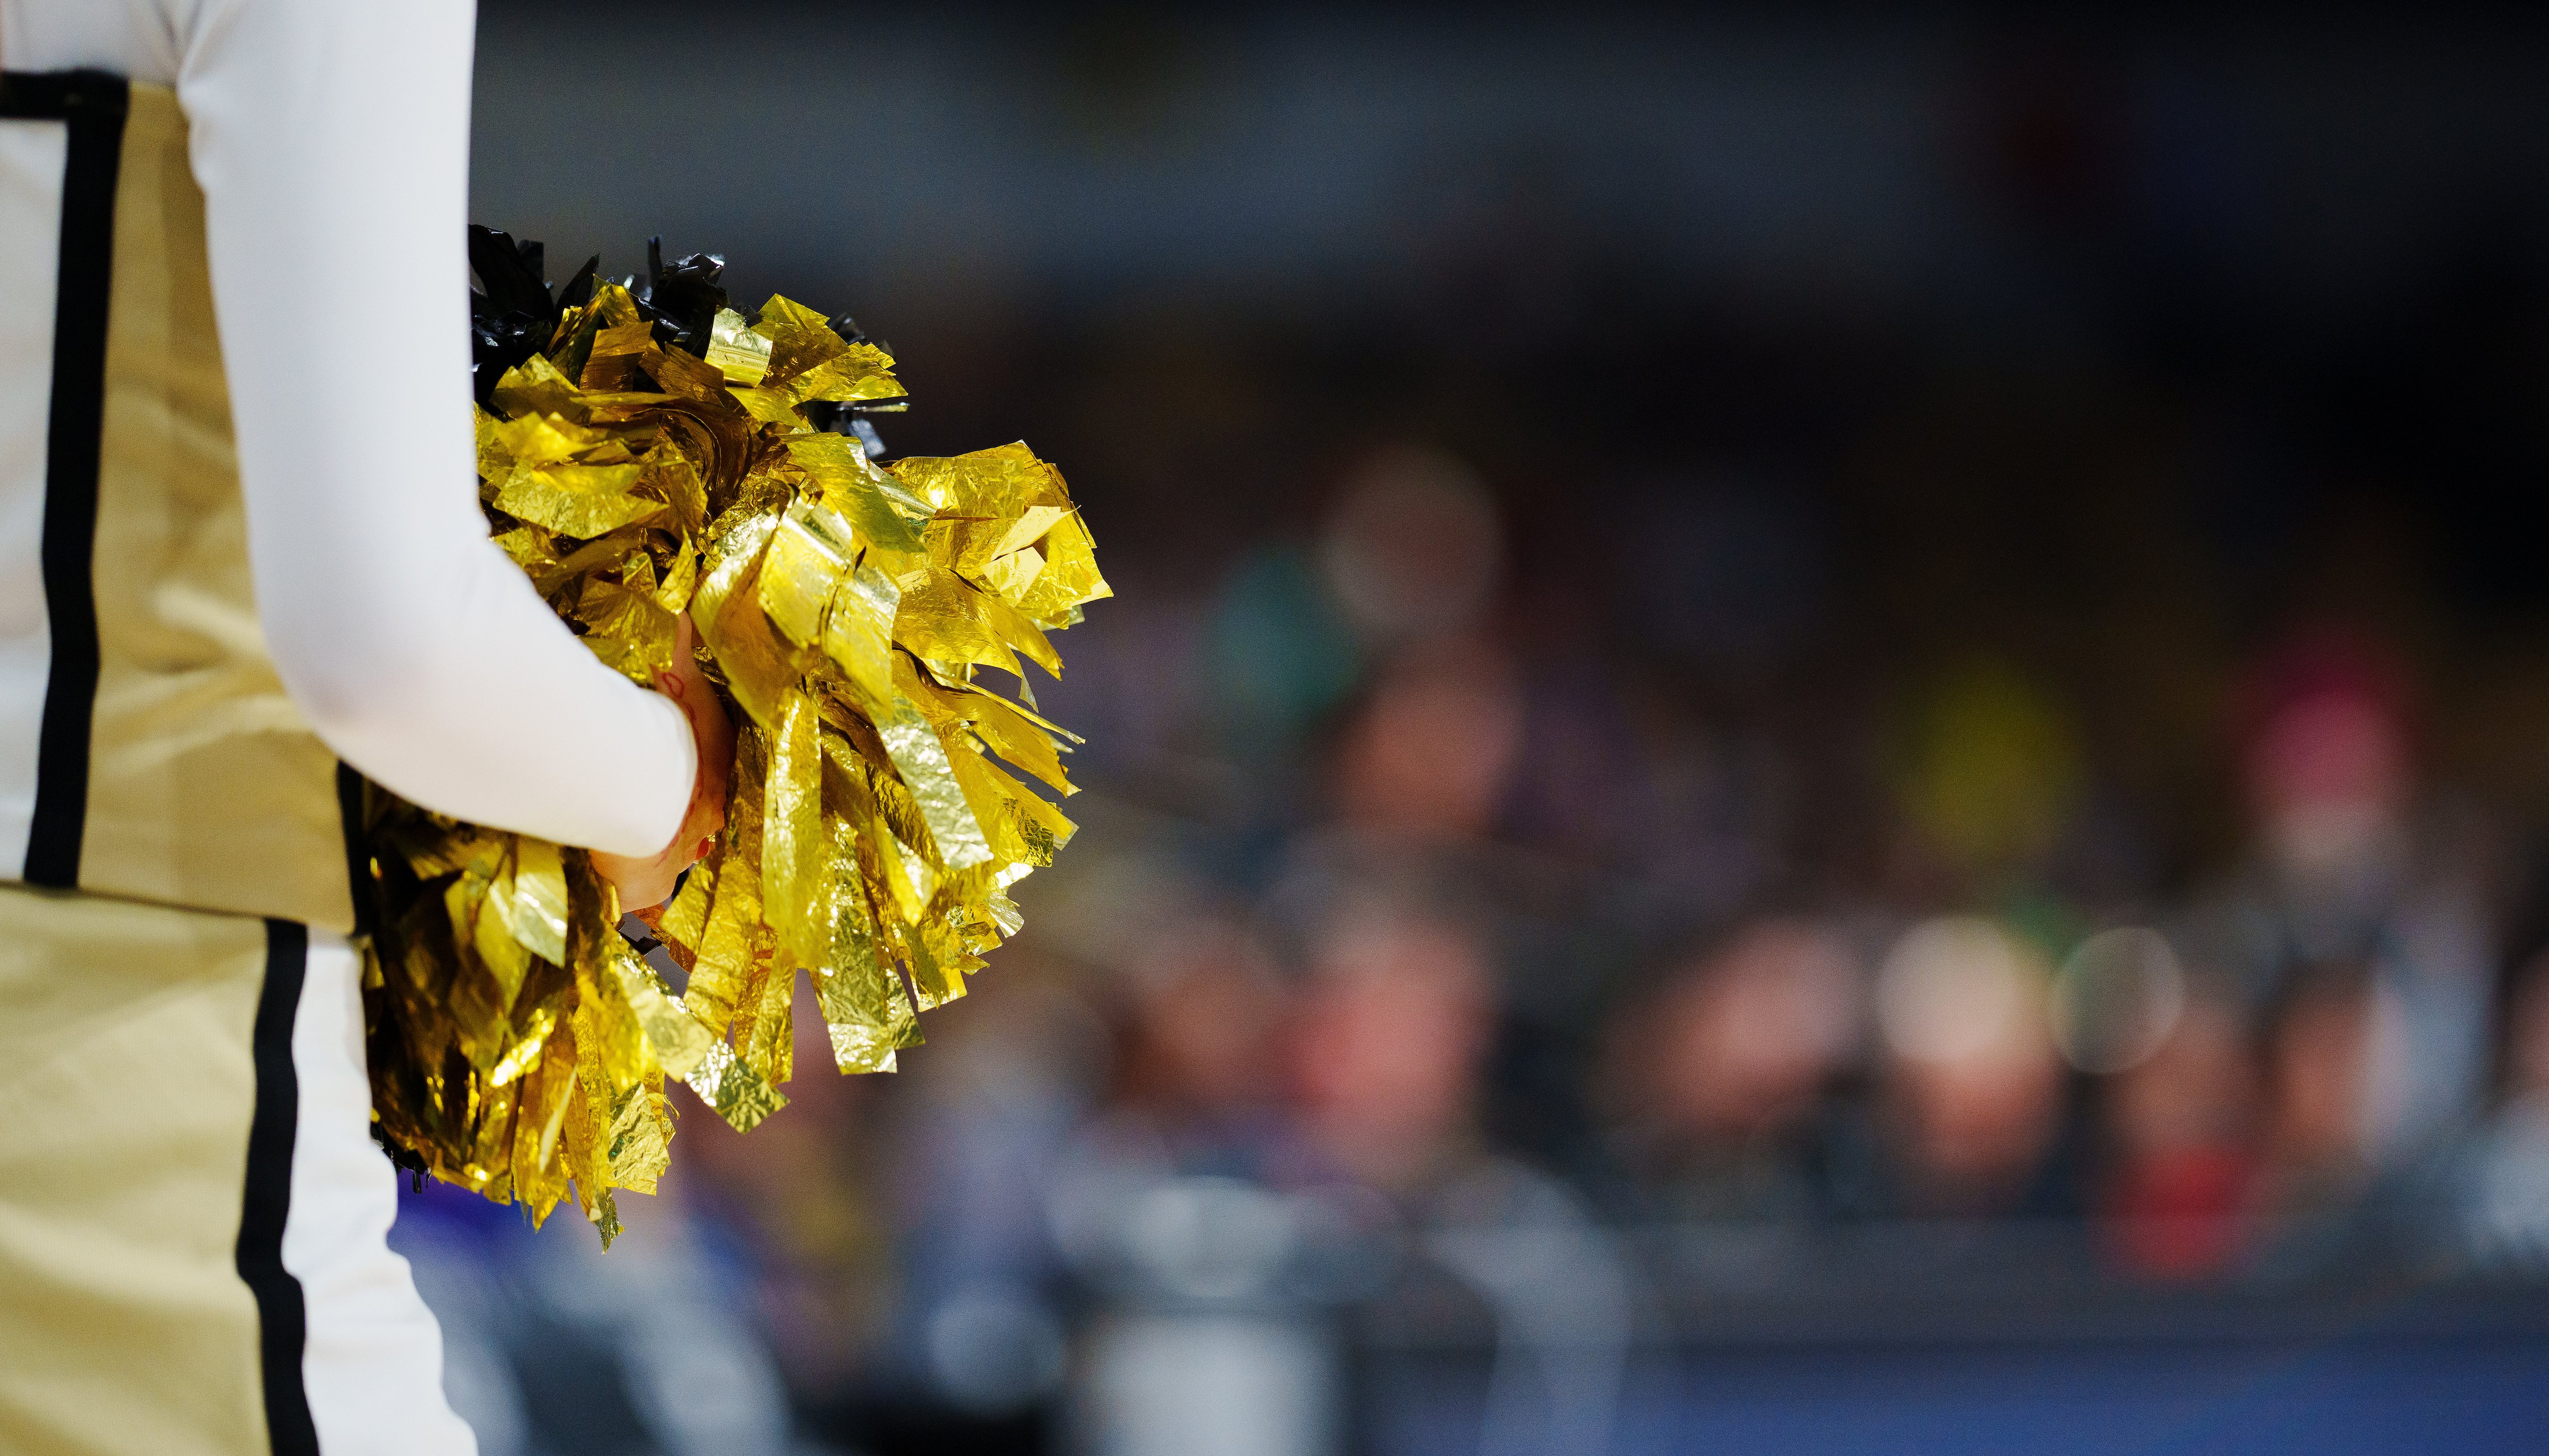 Read The Dynasty of UCF Cheer by UCF Knights